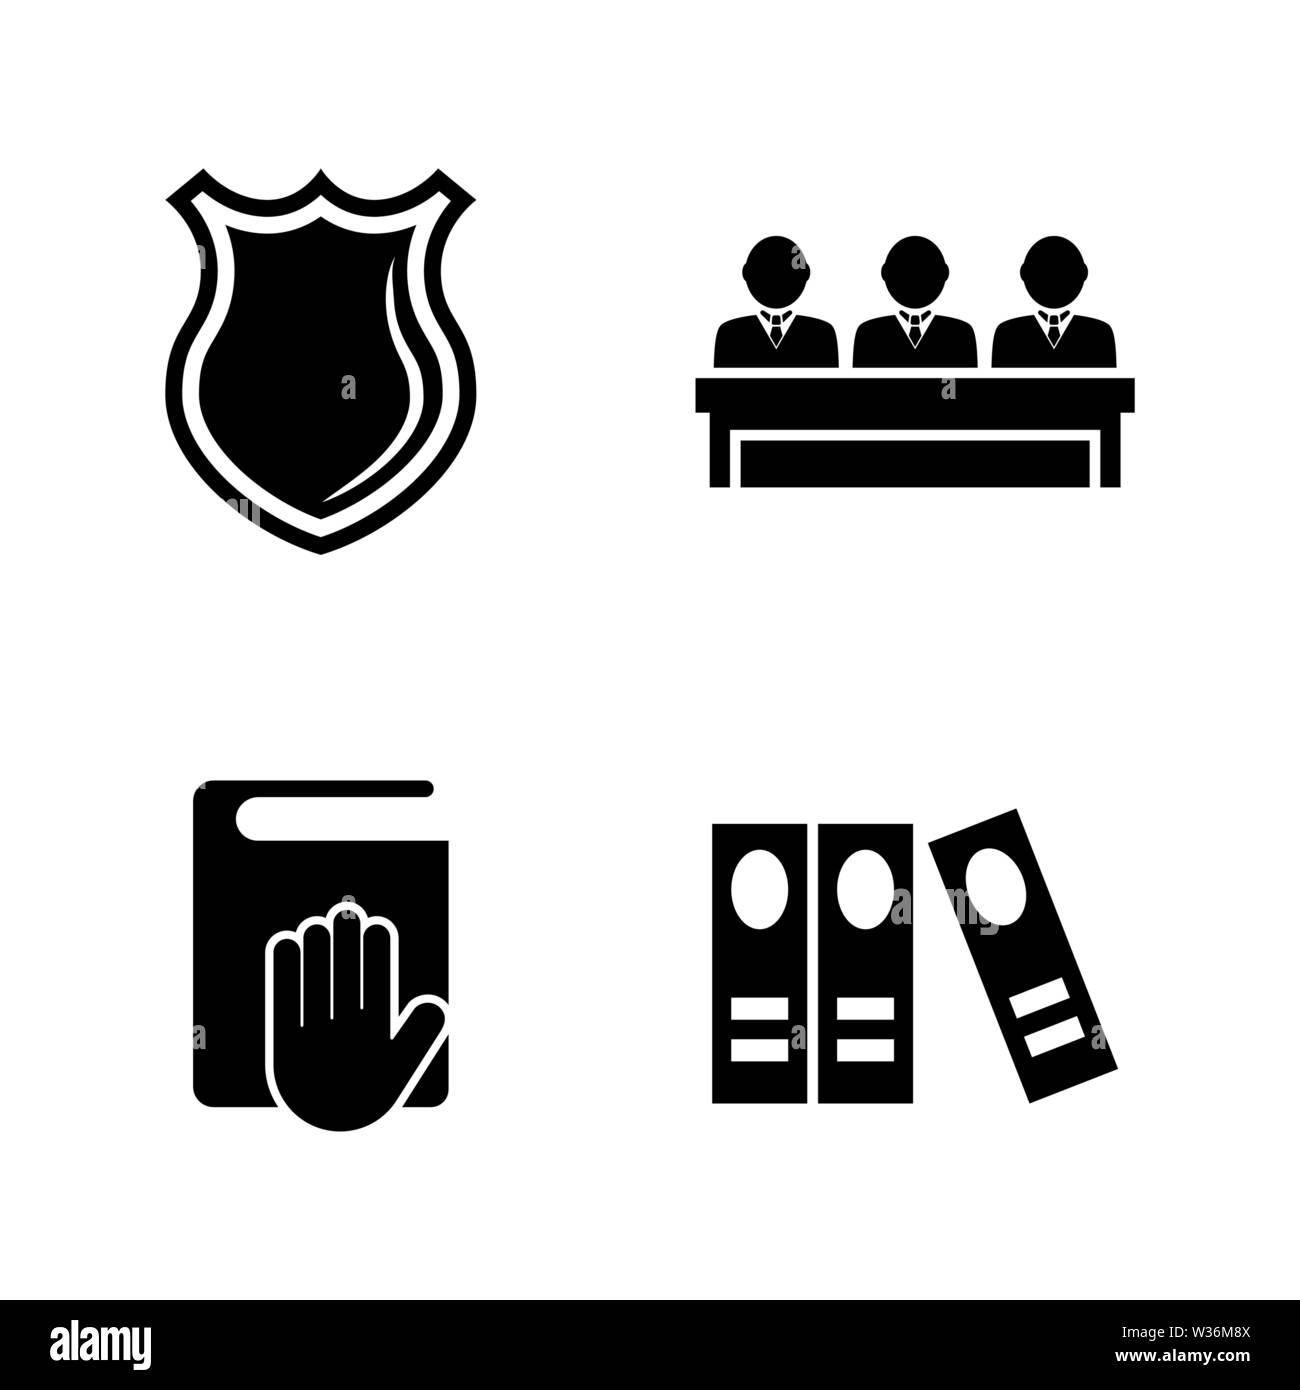 Law Justice Court Judge Simple Related Vector Icons Set For Video Mobile Apps Web Sites Print Projects And Your Design Law Justice Court Judge Stock Vector Image Art Alamy